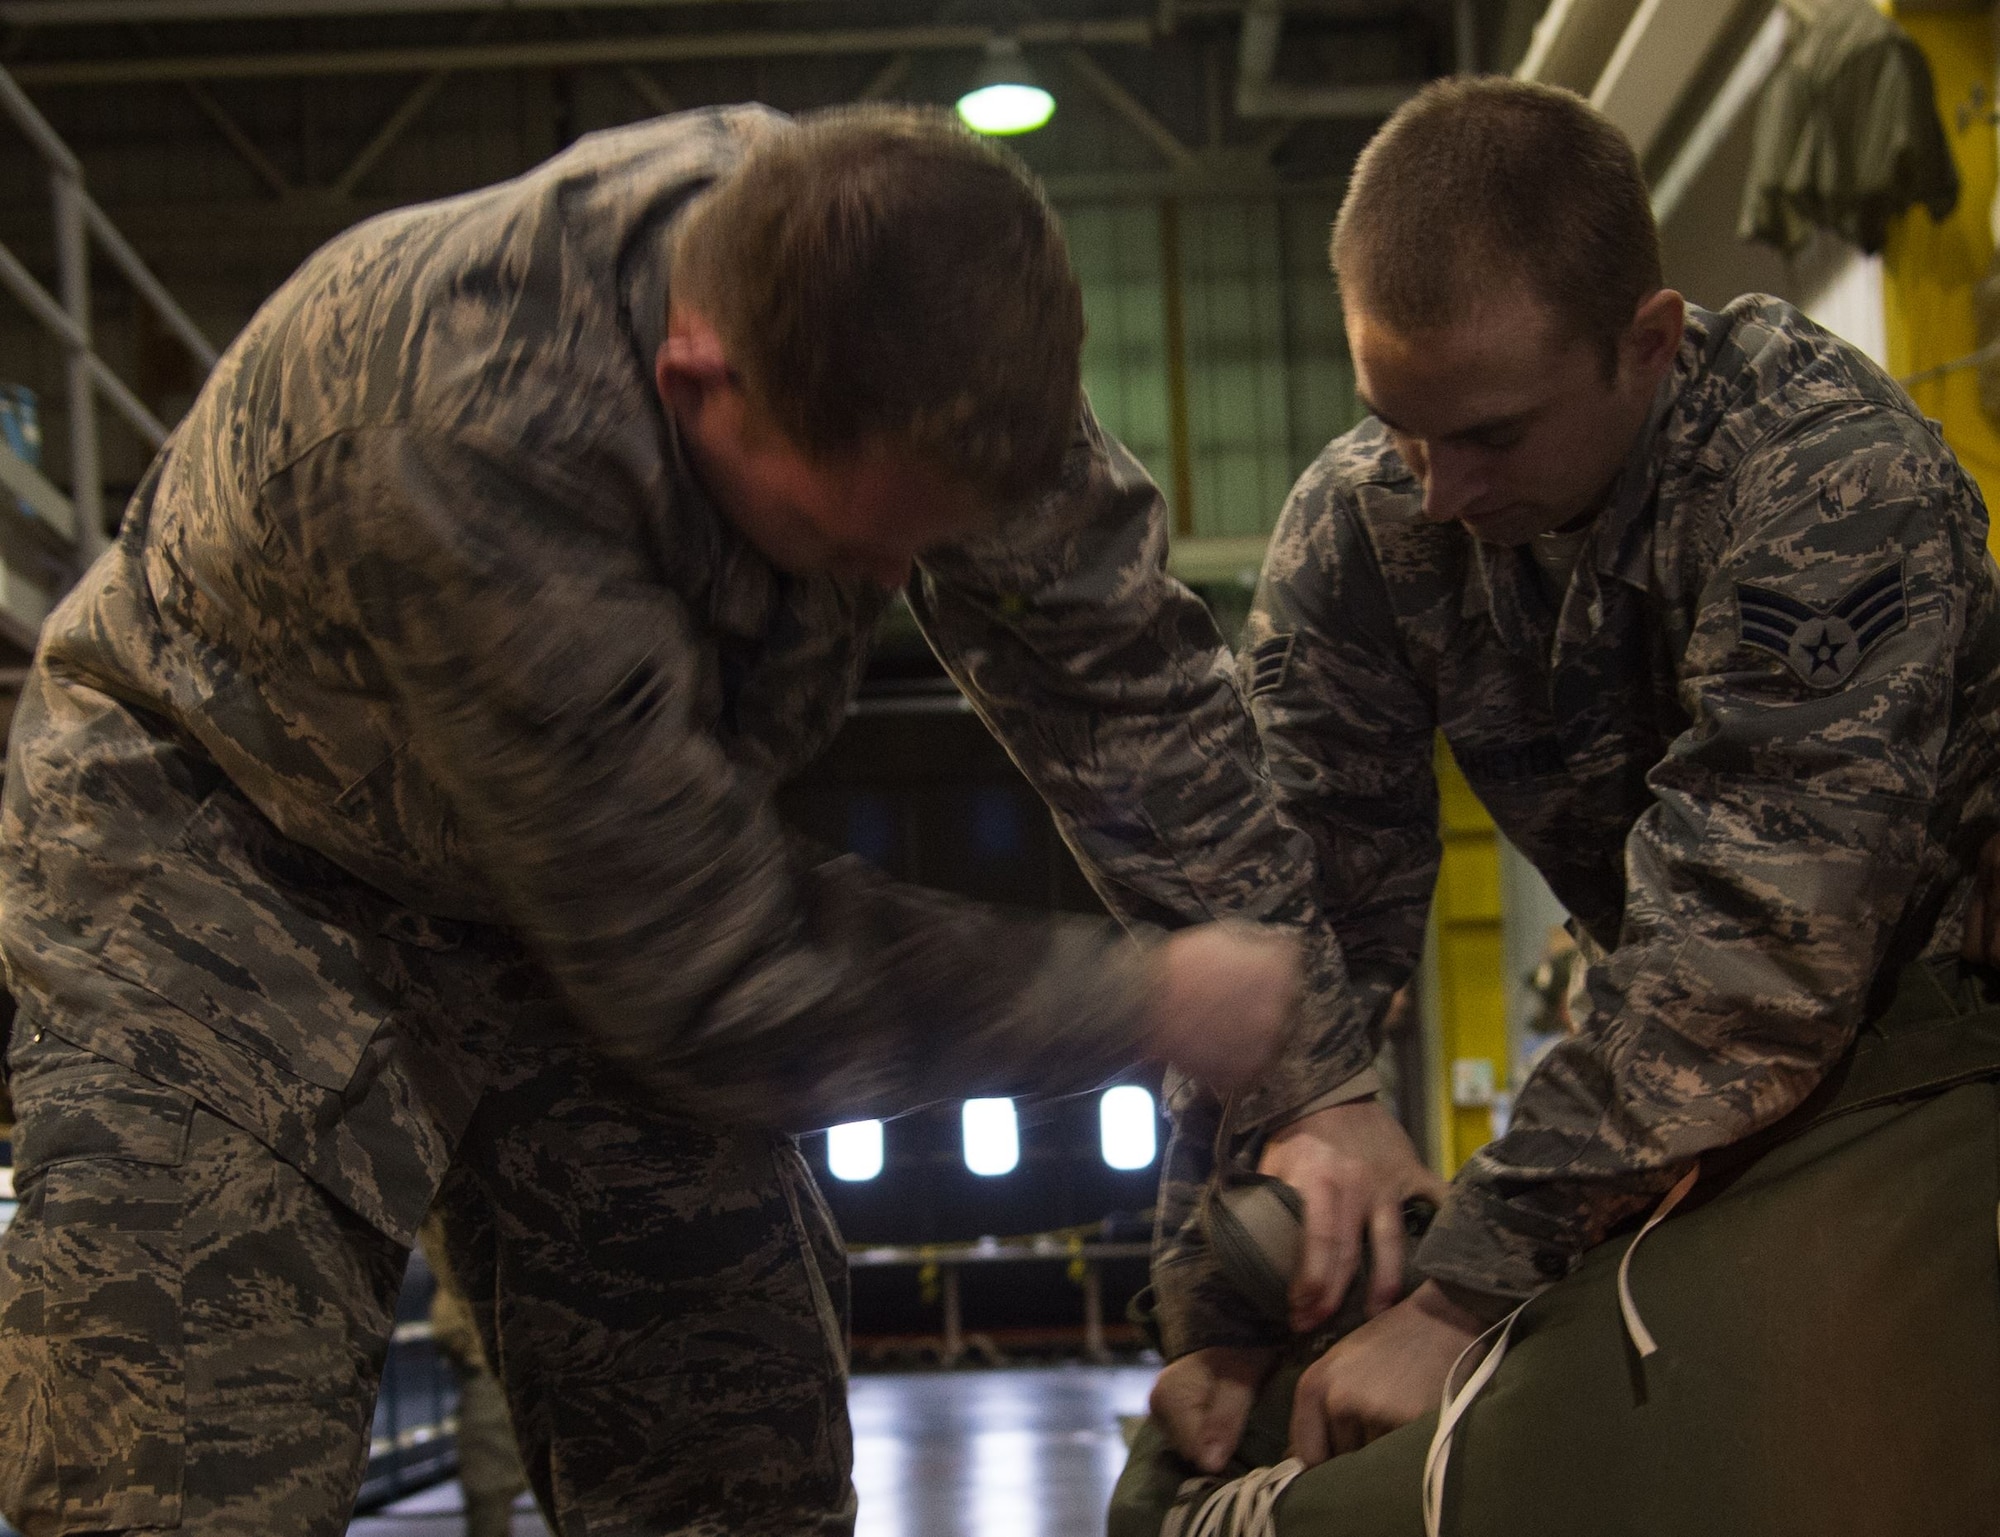 U.S. Air Force Airman 1st Class Zachary Barber (left) and Senior Airman Sean Obermeyer, 773d Logistics Readiness Squadron combat mobility technicians, pack a G-12 cargo parachute at Joint Base Elmendorf-Richardson, Alaska, Jan. 18, 2018. C-130 Hercules and C-17 Globemaster III aircraft use G-12 cargo parachutes to support heavy cargo pallets weighing between 501 and 2,200 pounds, providing critical supplies to warfighters down range as well as rescue missions in Alaska.